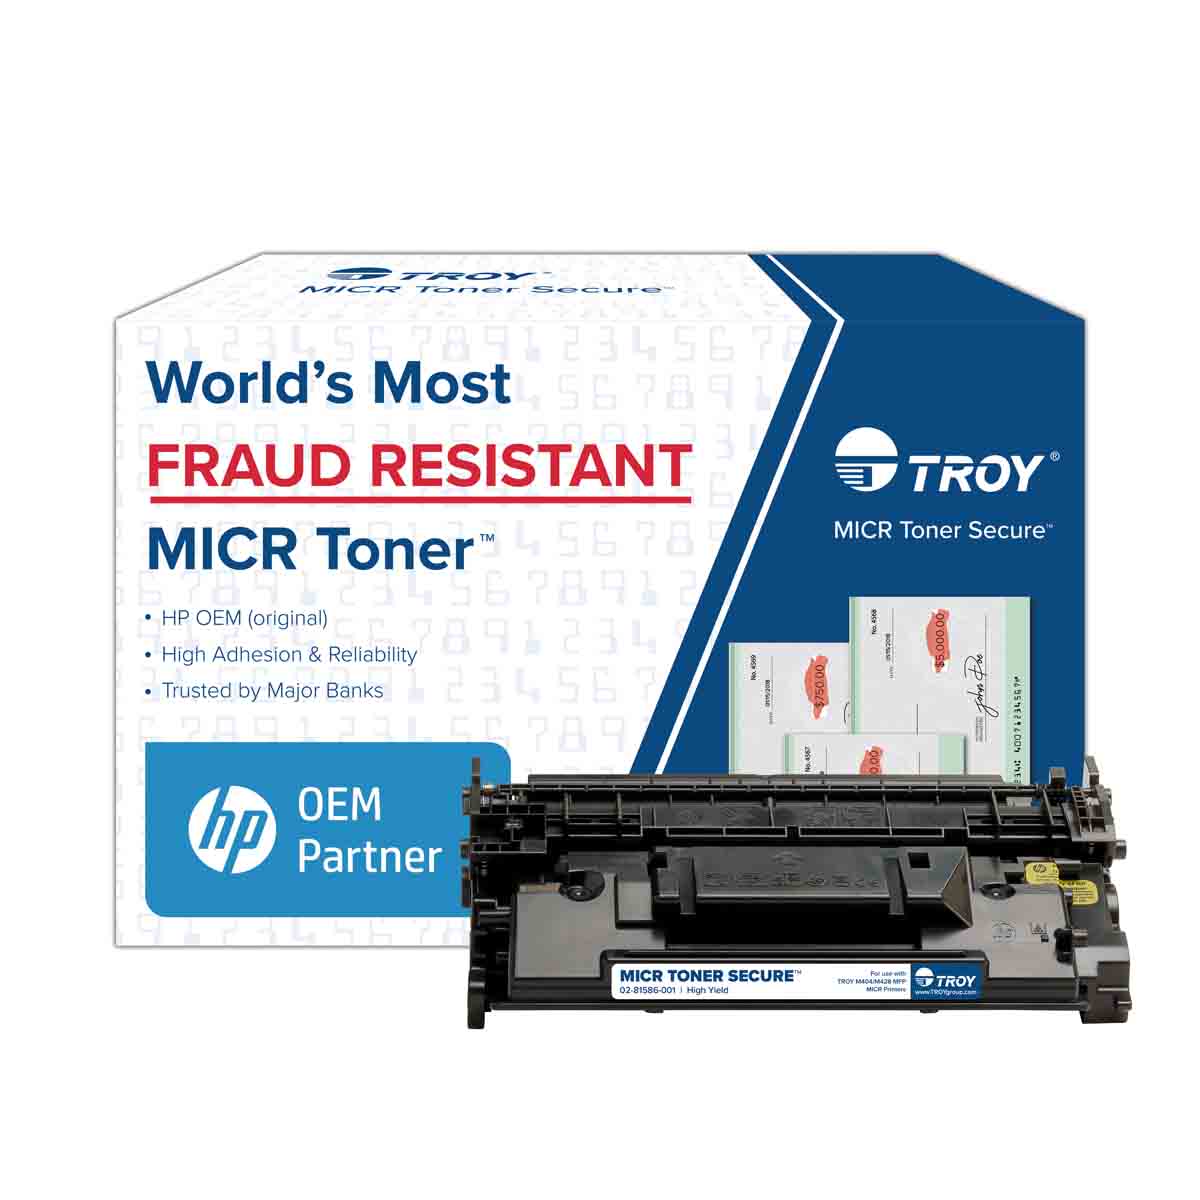 TROY M404/M428/M406 MICR Toner Secure High Yield Cartridge (Coordinating HP Part Number: CF258X)